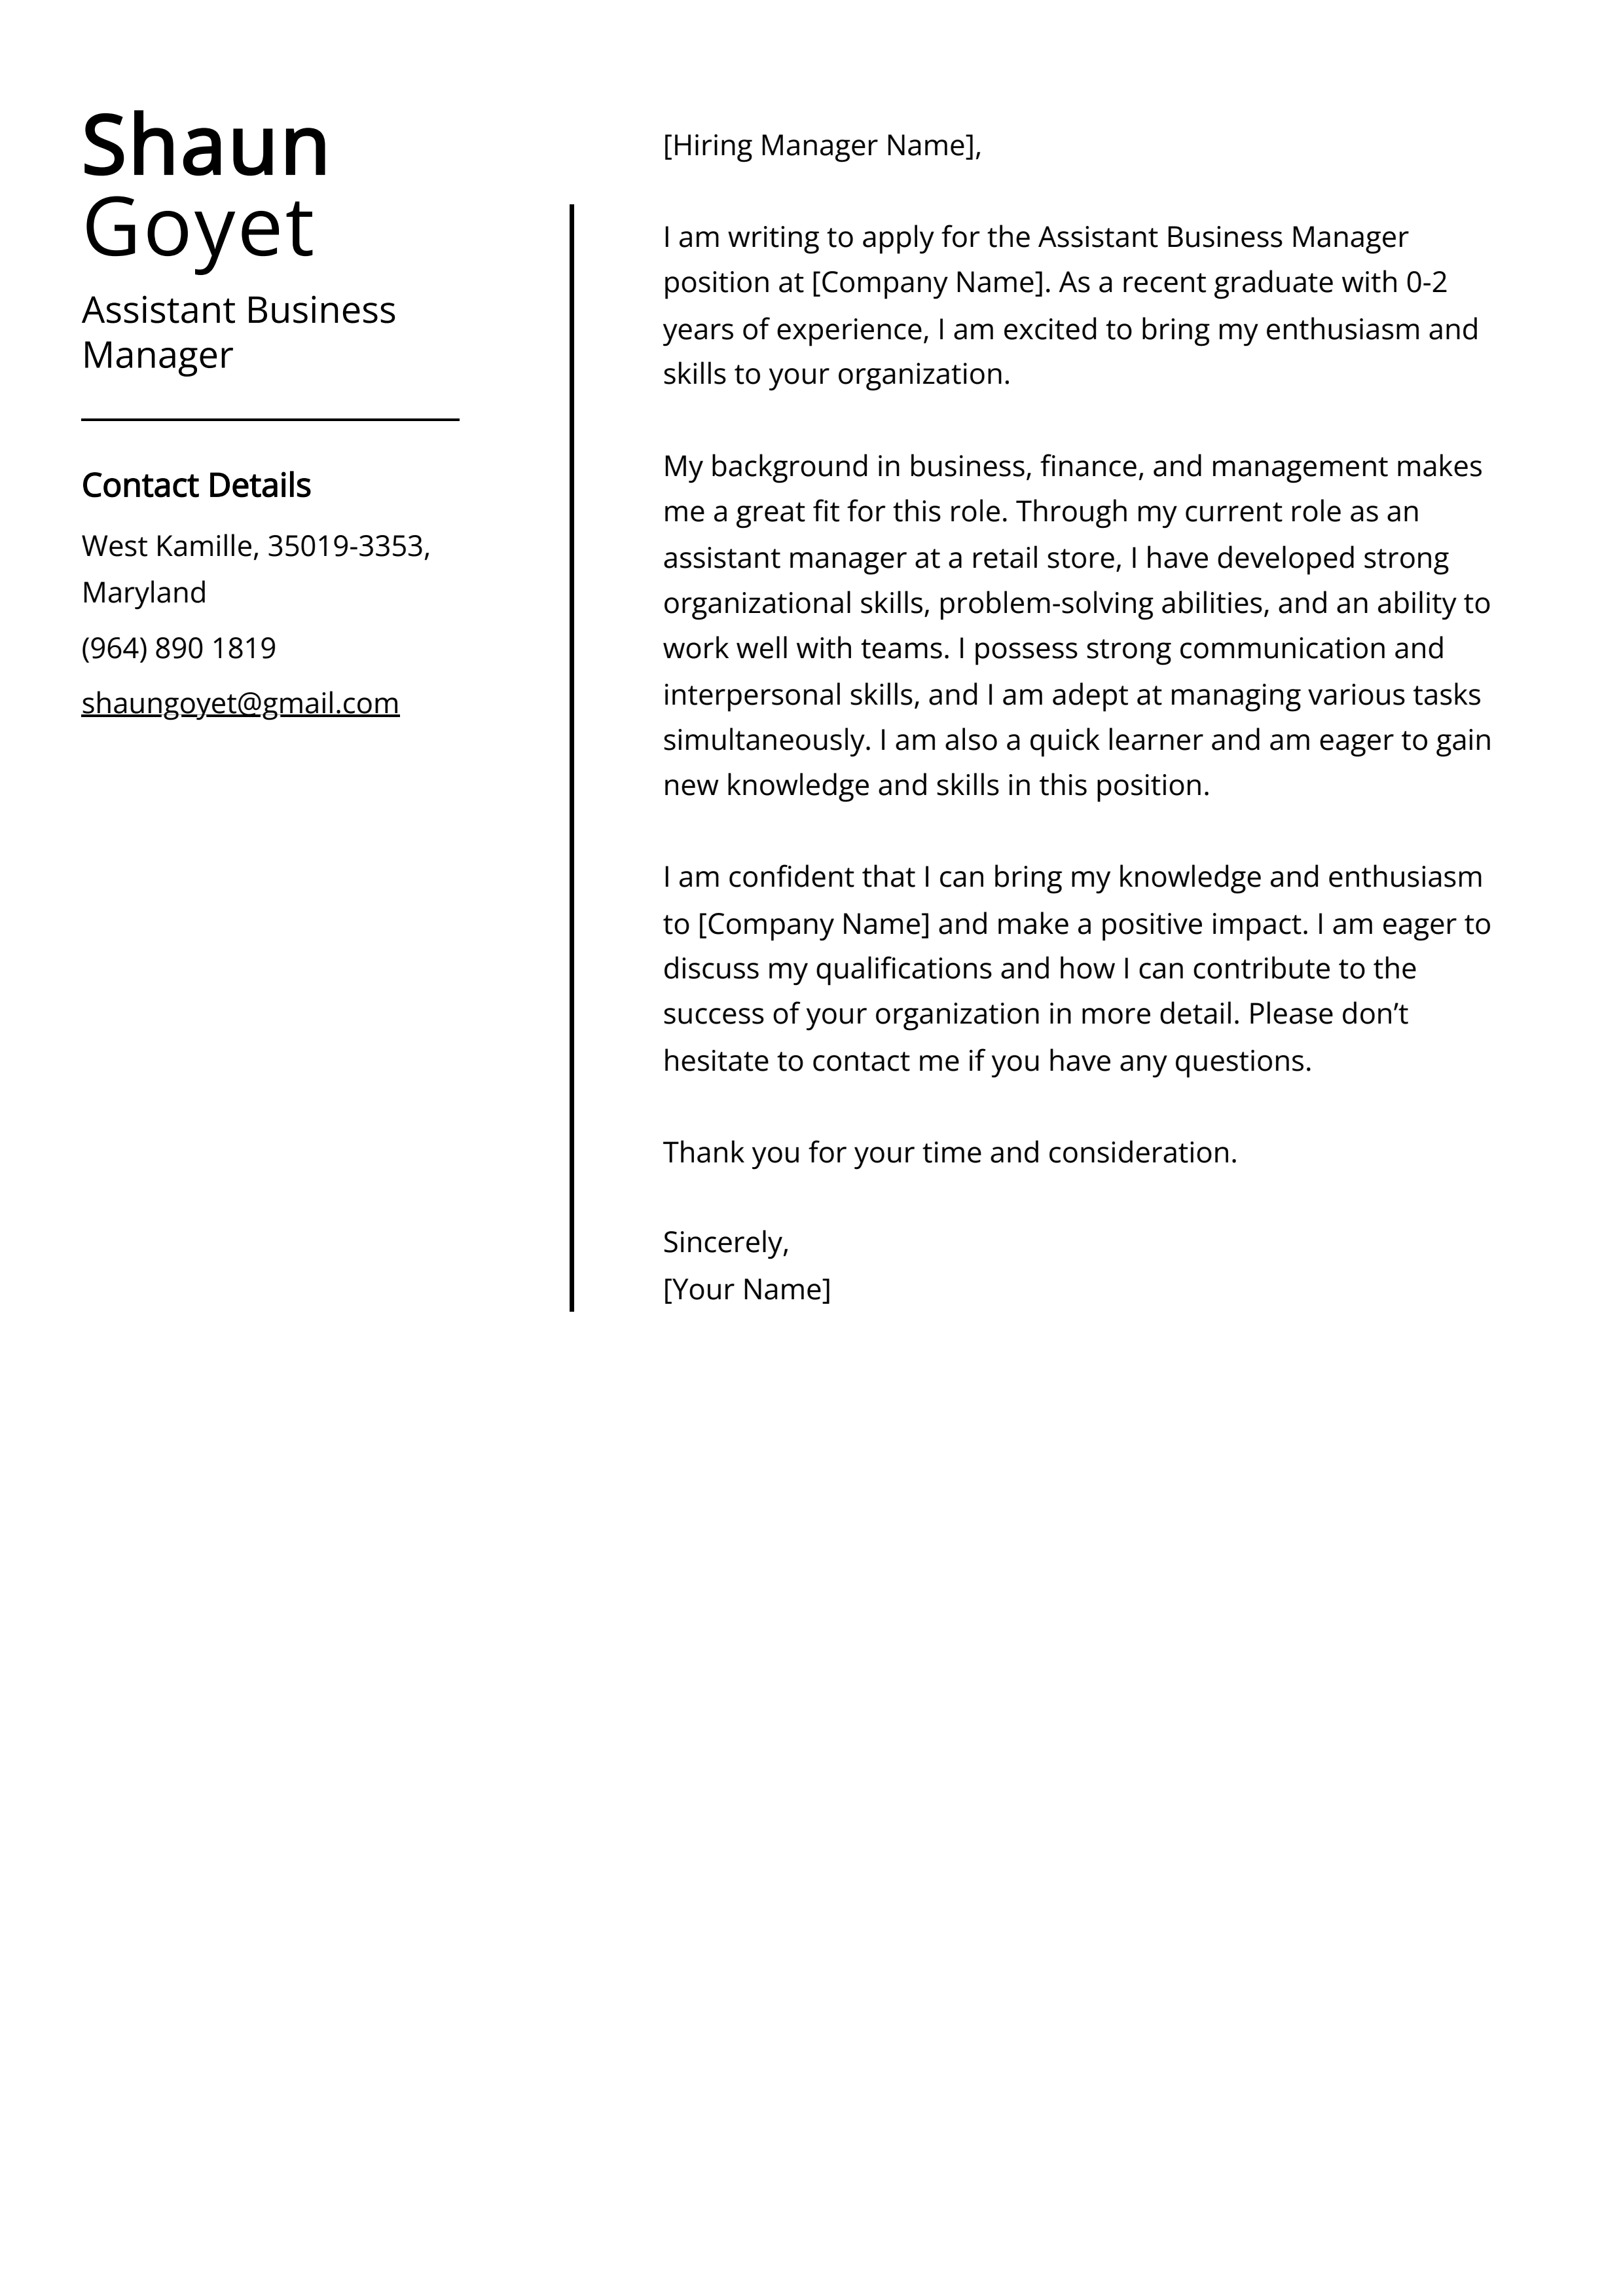 Assistant Business Manager Cover Letter Example